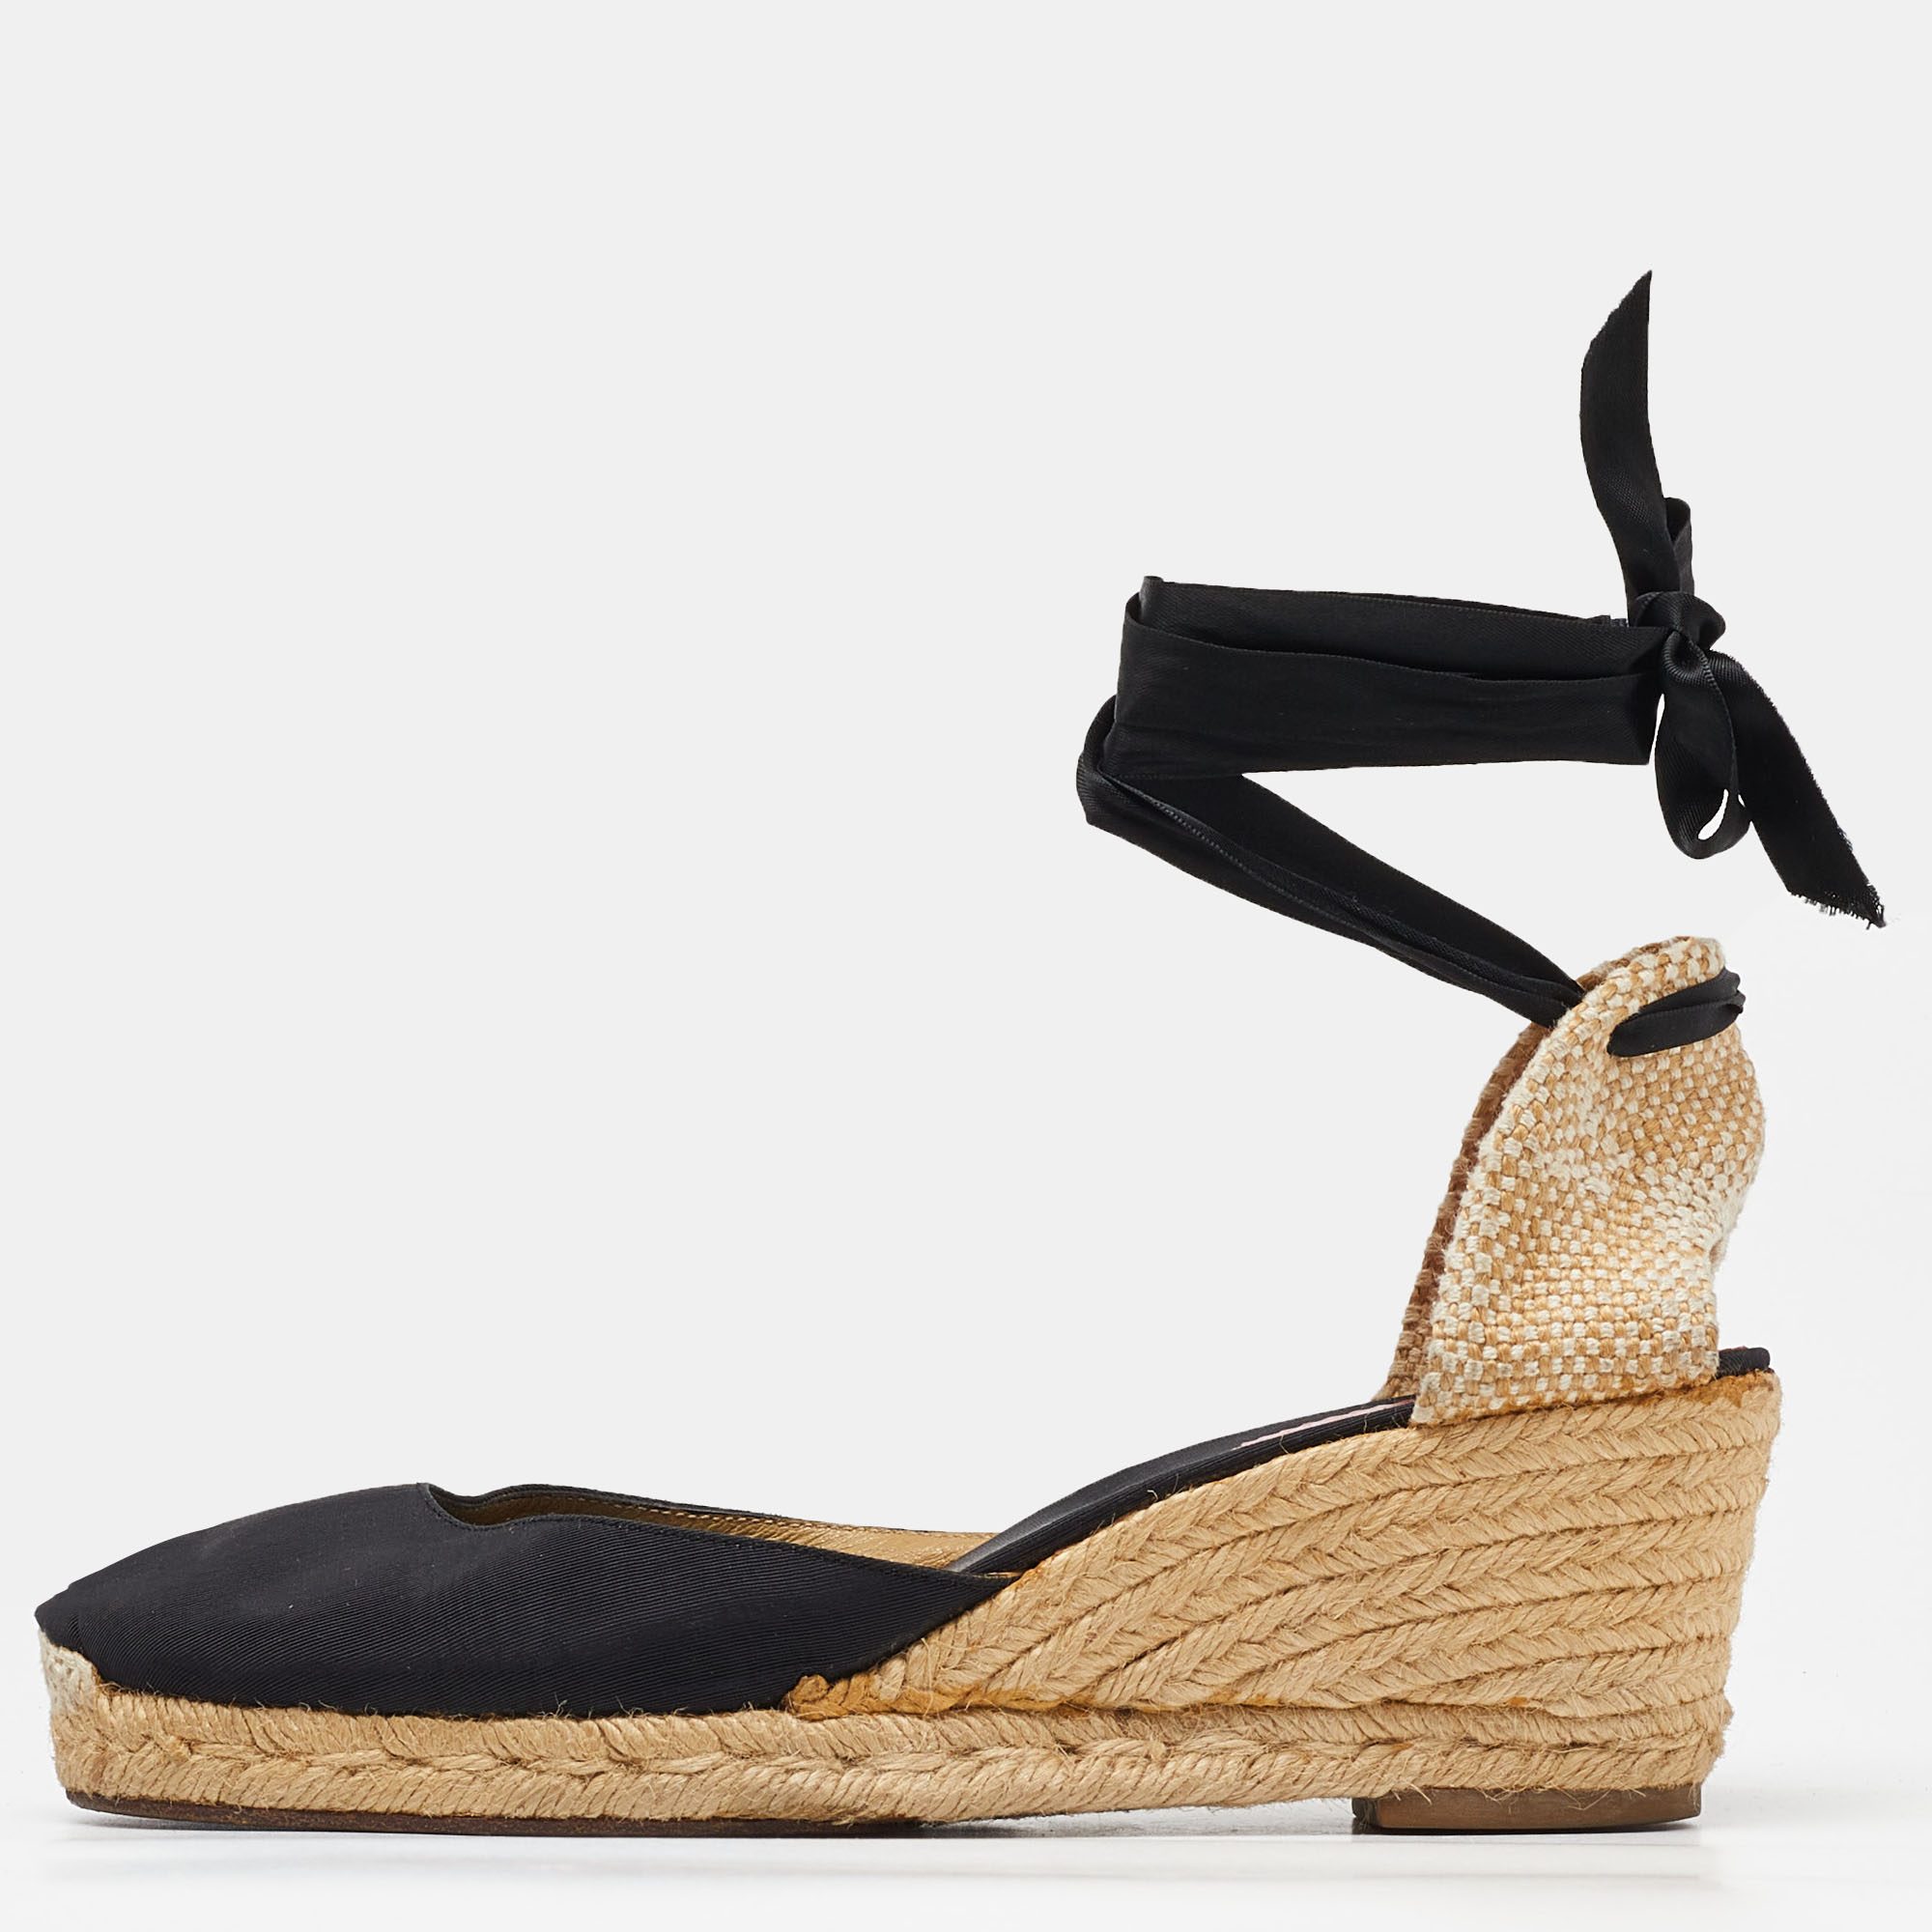 You can count on these designer sandals to complete a summer look. They are crafted beautifully and designed to offer the right fit and a comfortable lift.